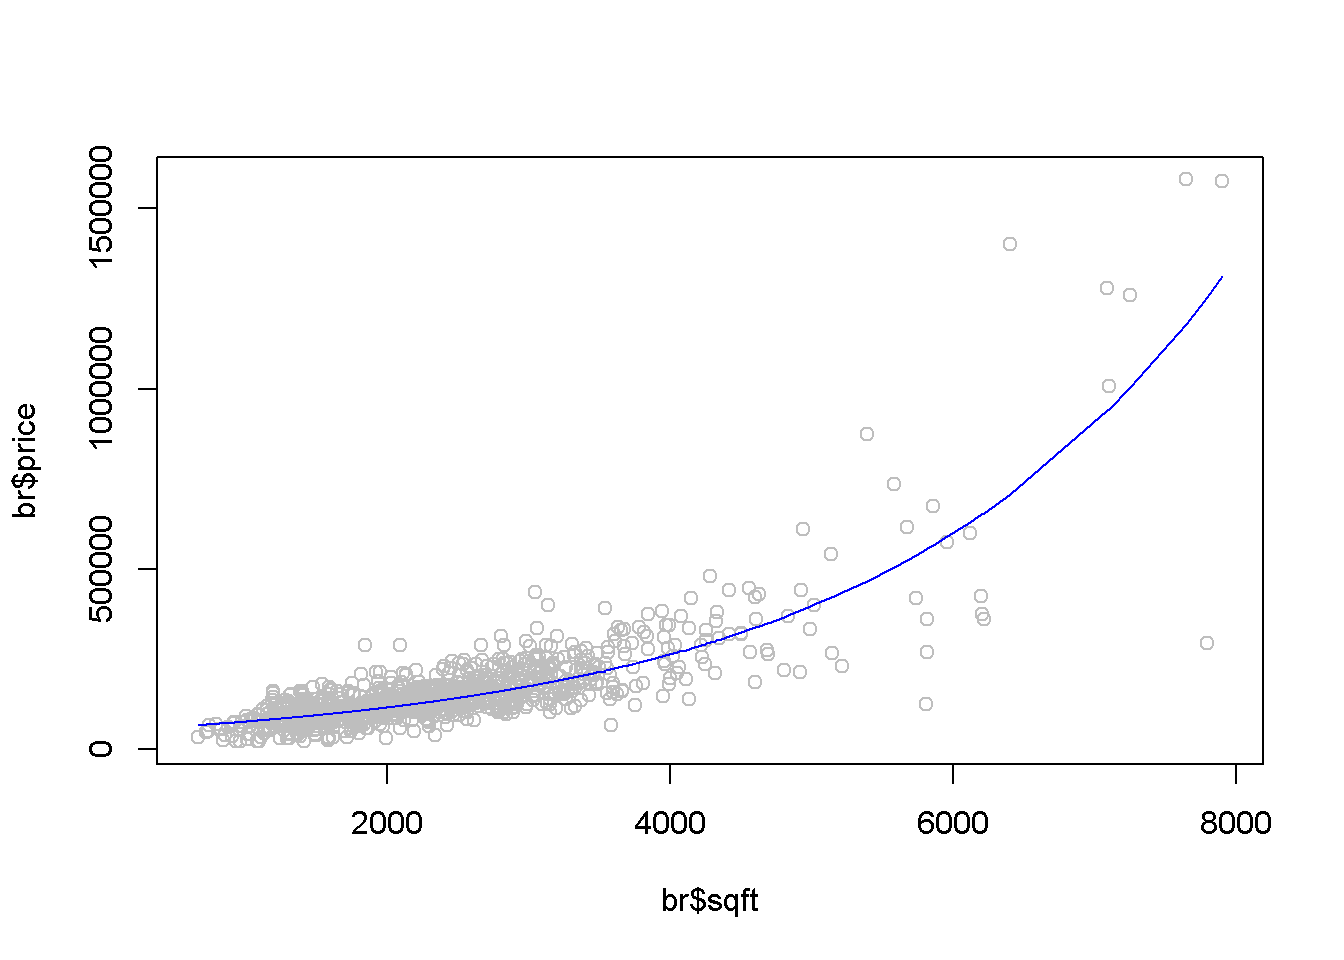 The fitted value curve in the log-linear model